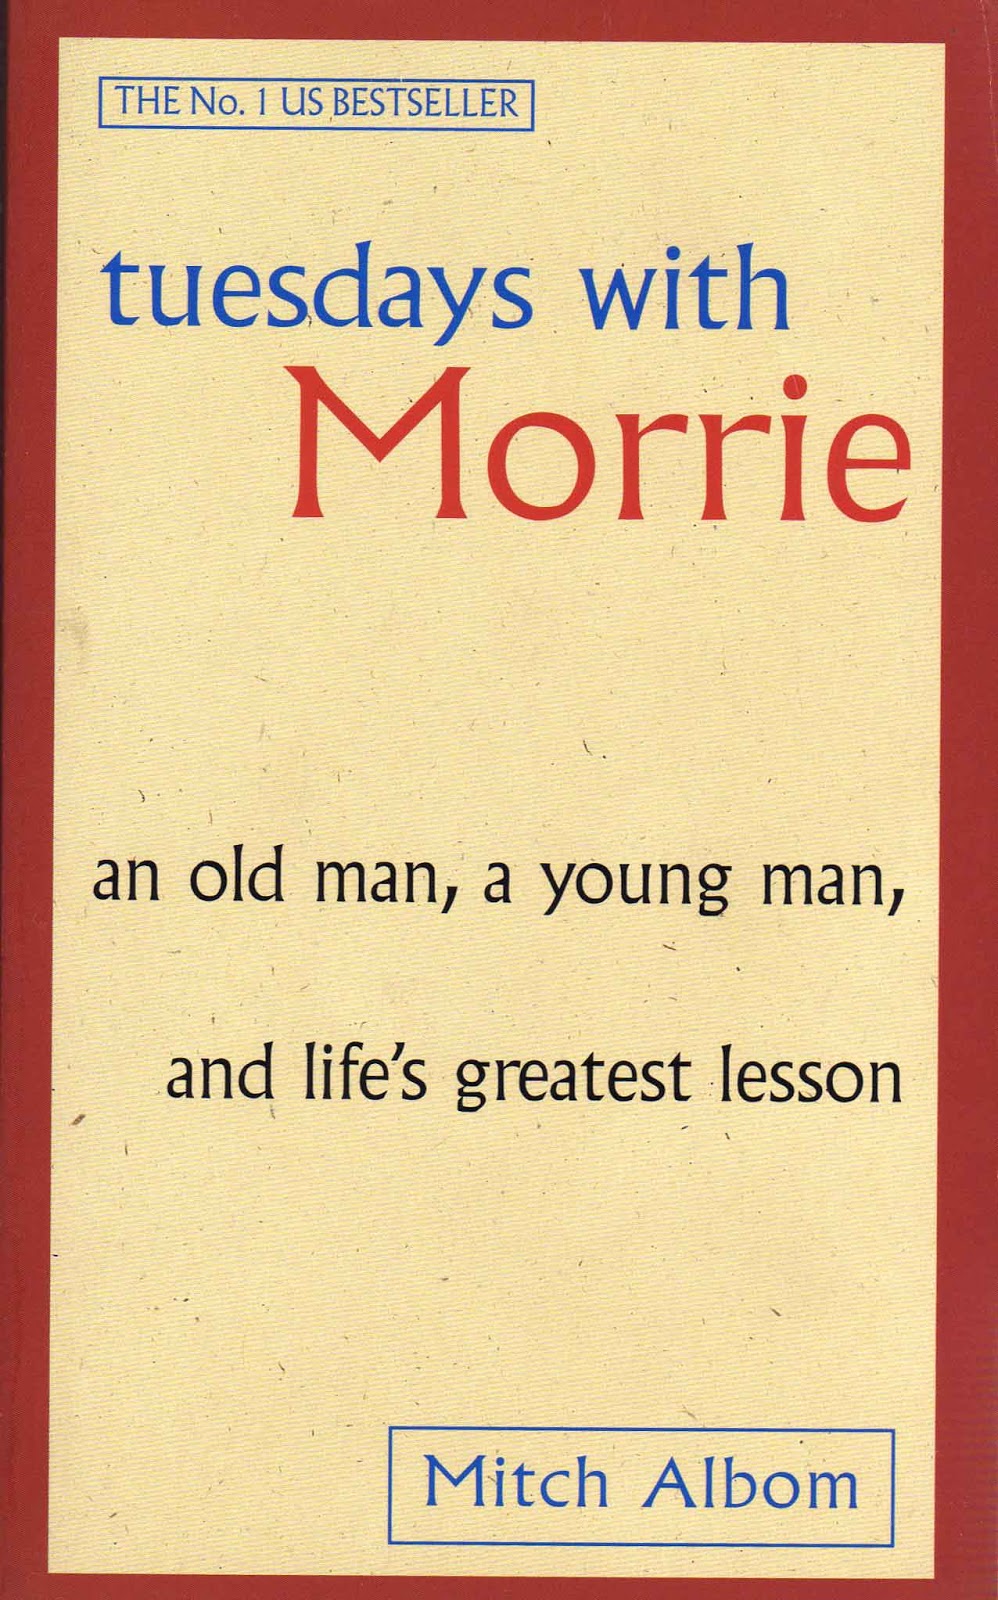 book review of tuesdays with morrie